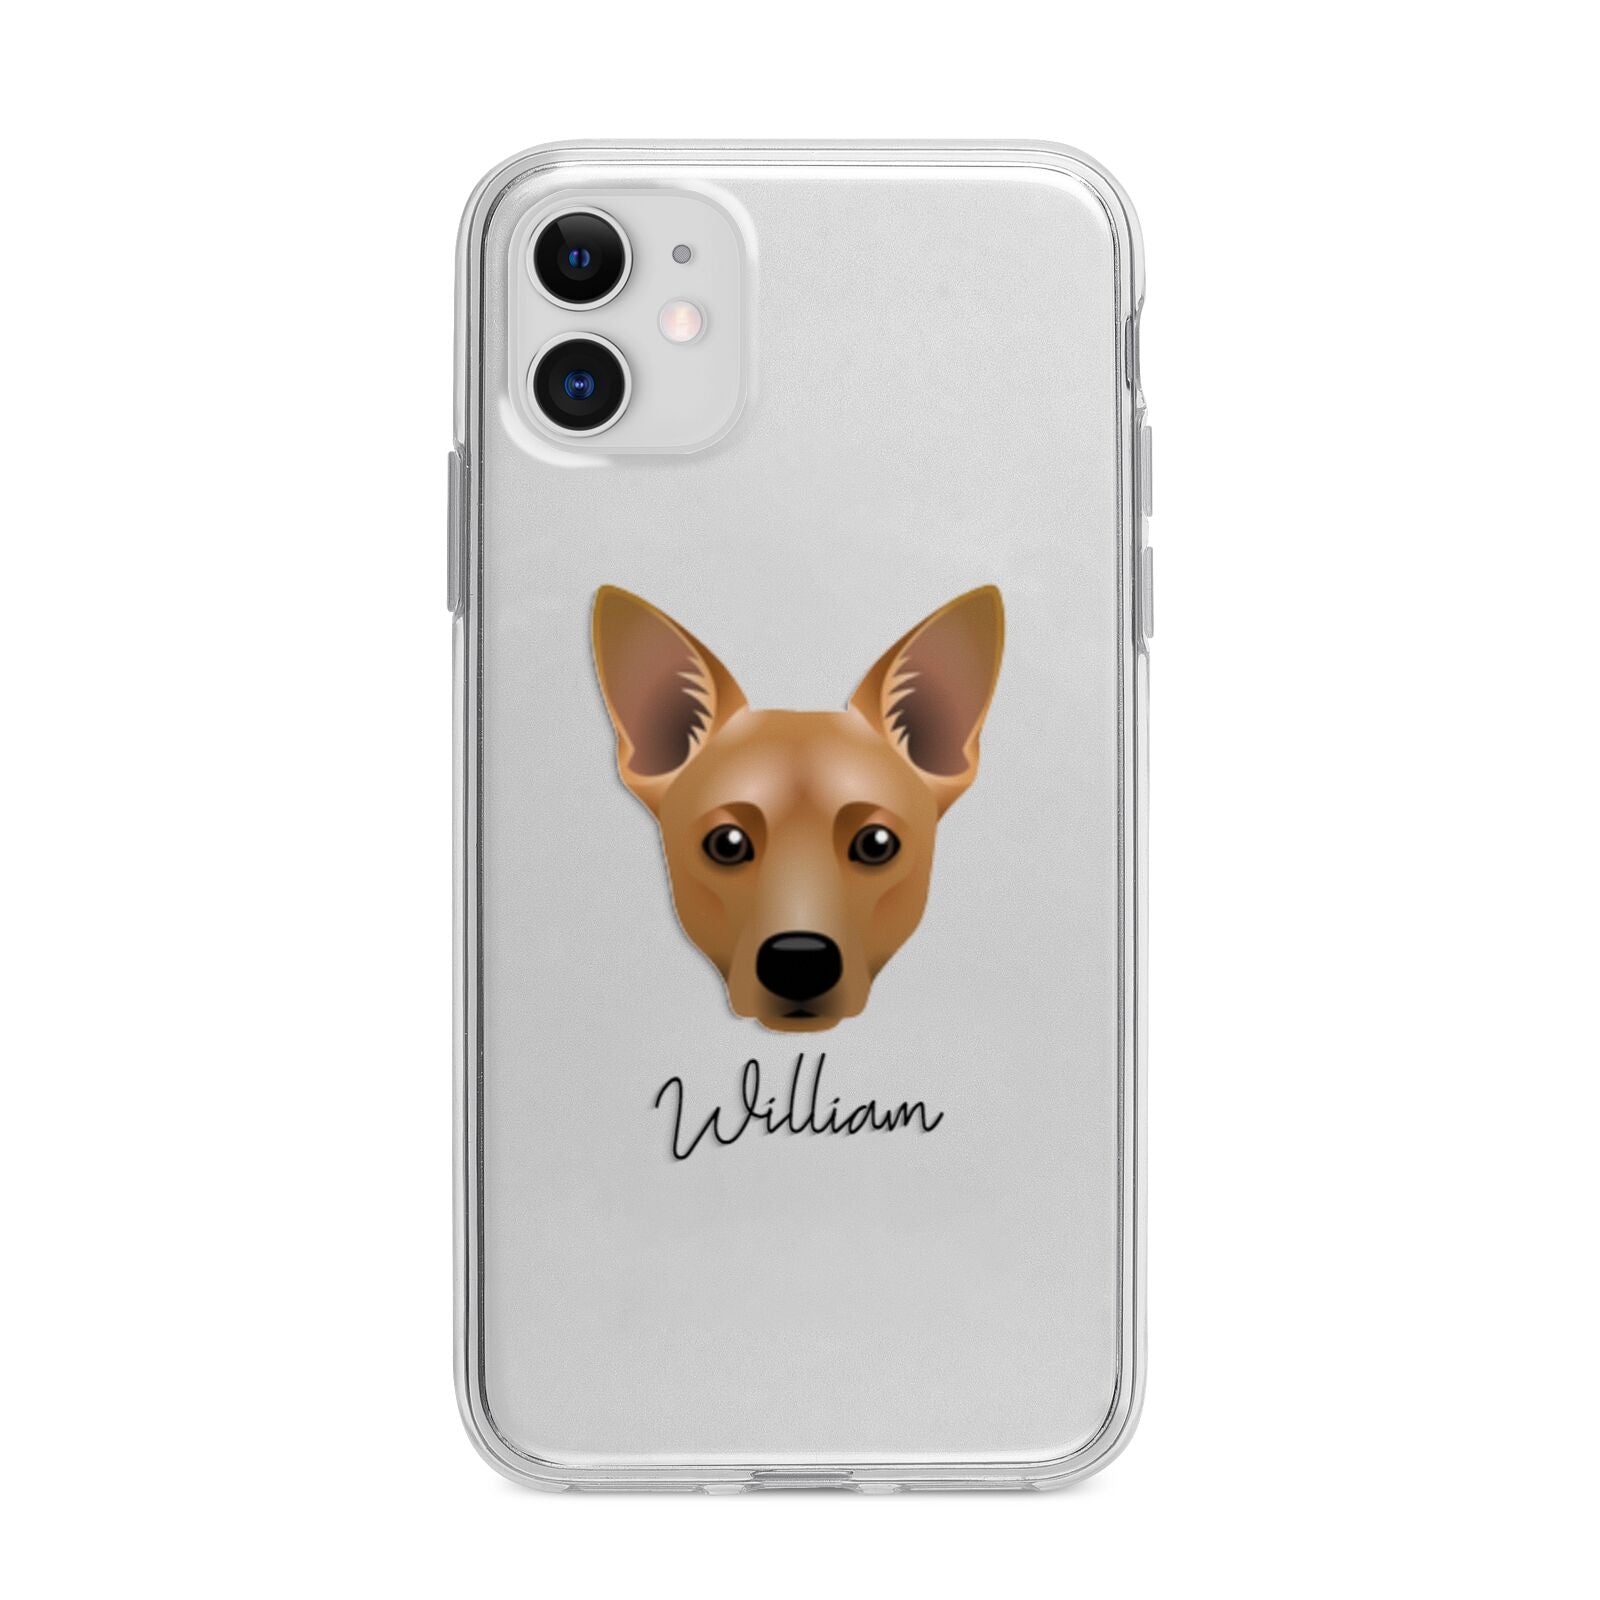 Cojack Personalised Apple iPhone 11 in White with Bumper Case